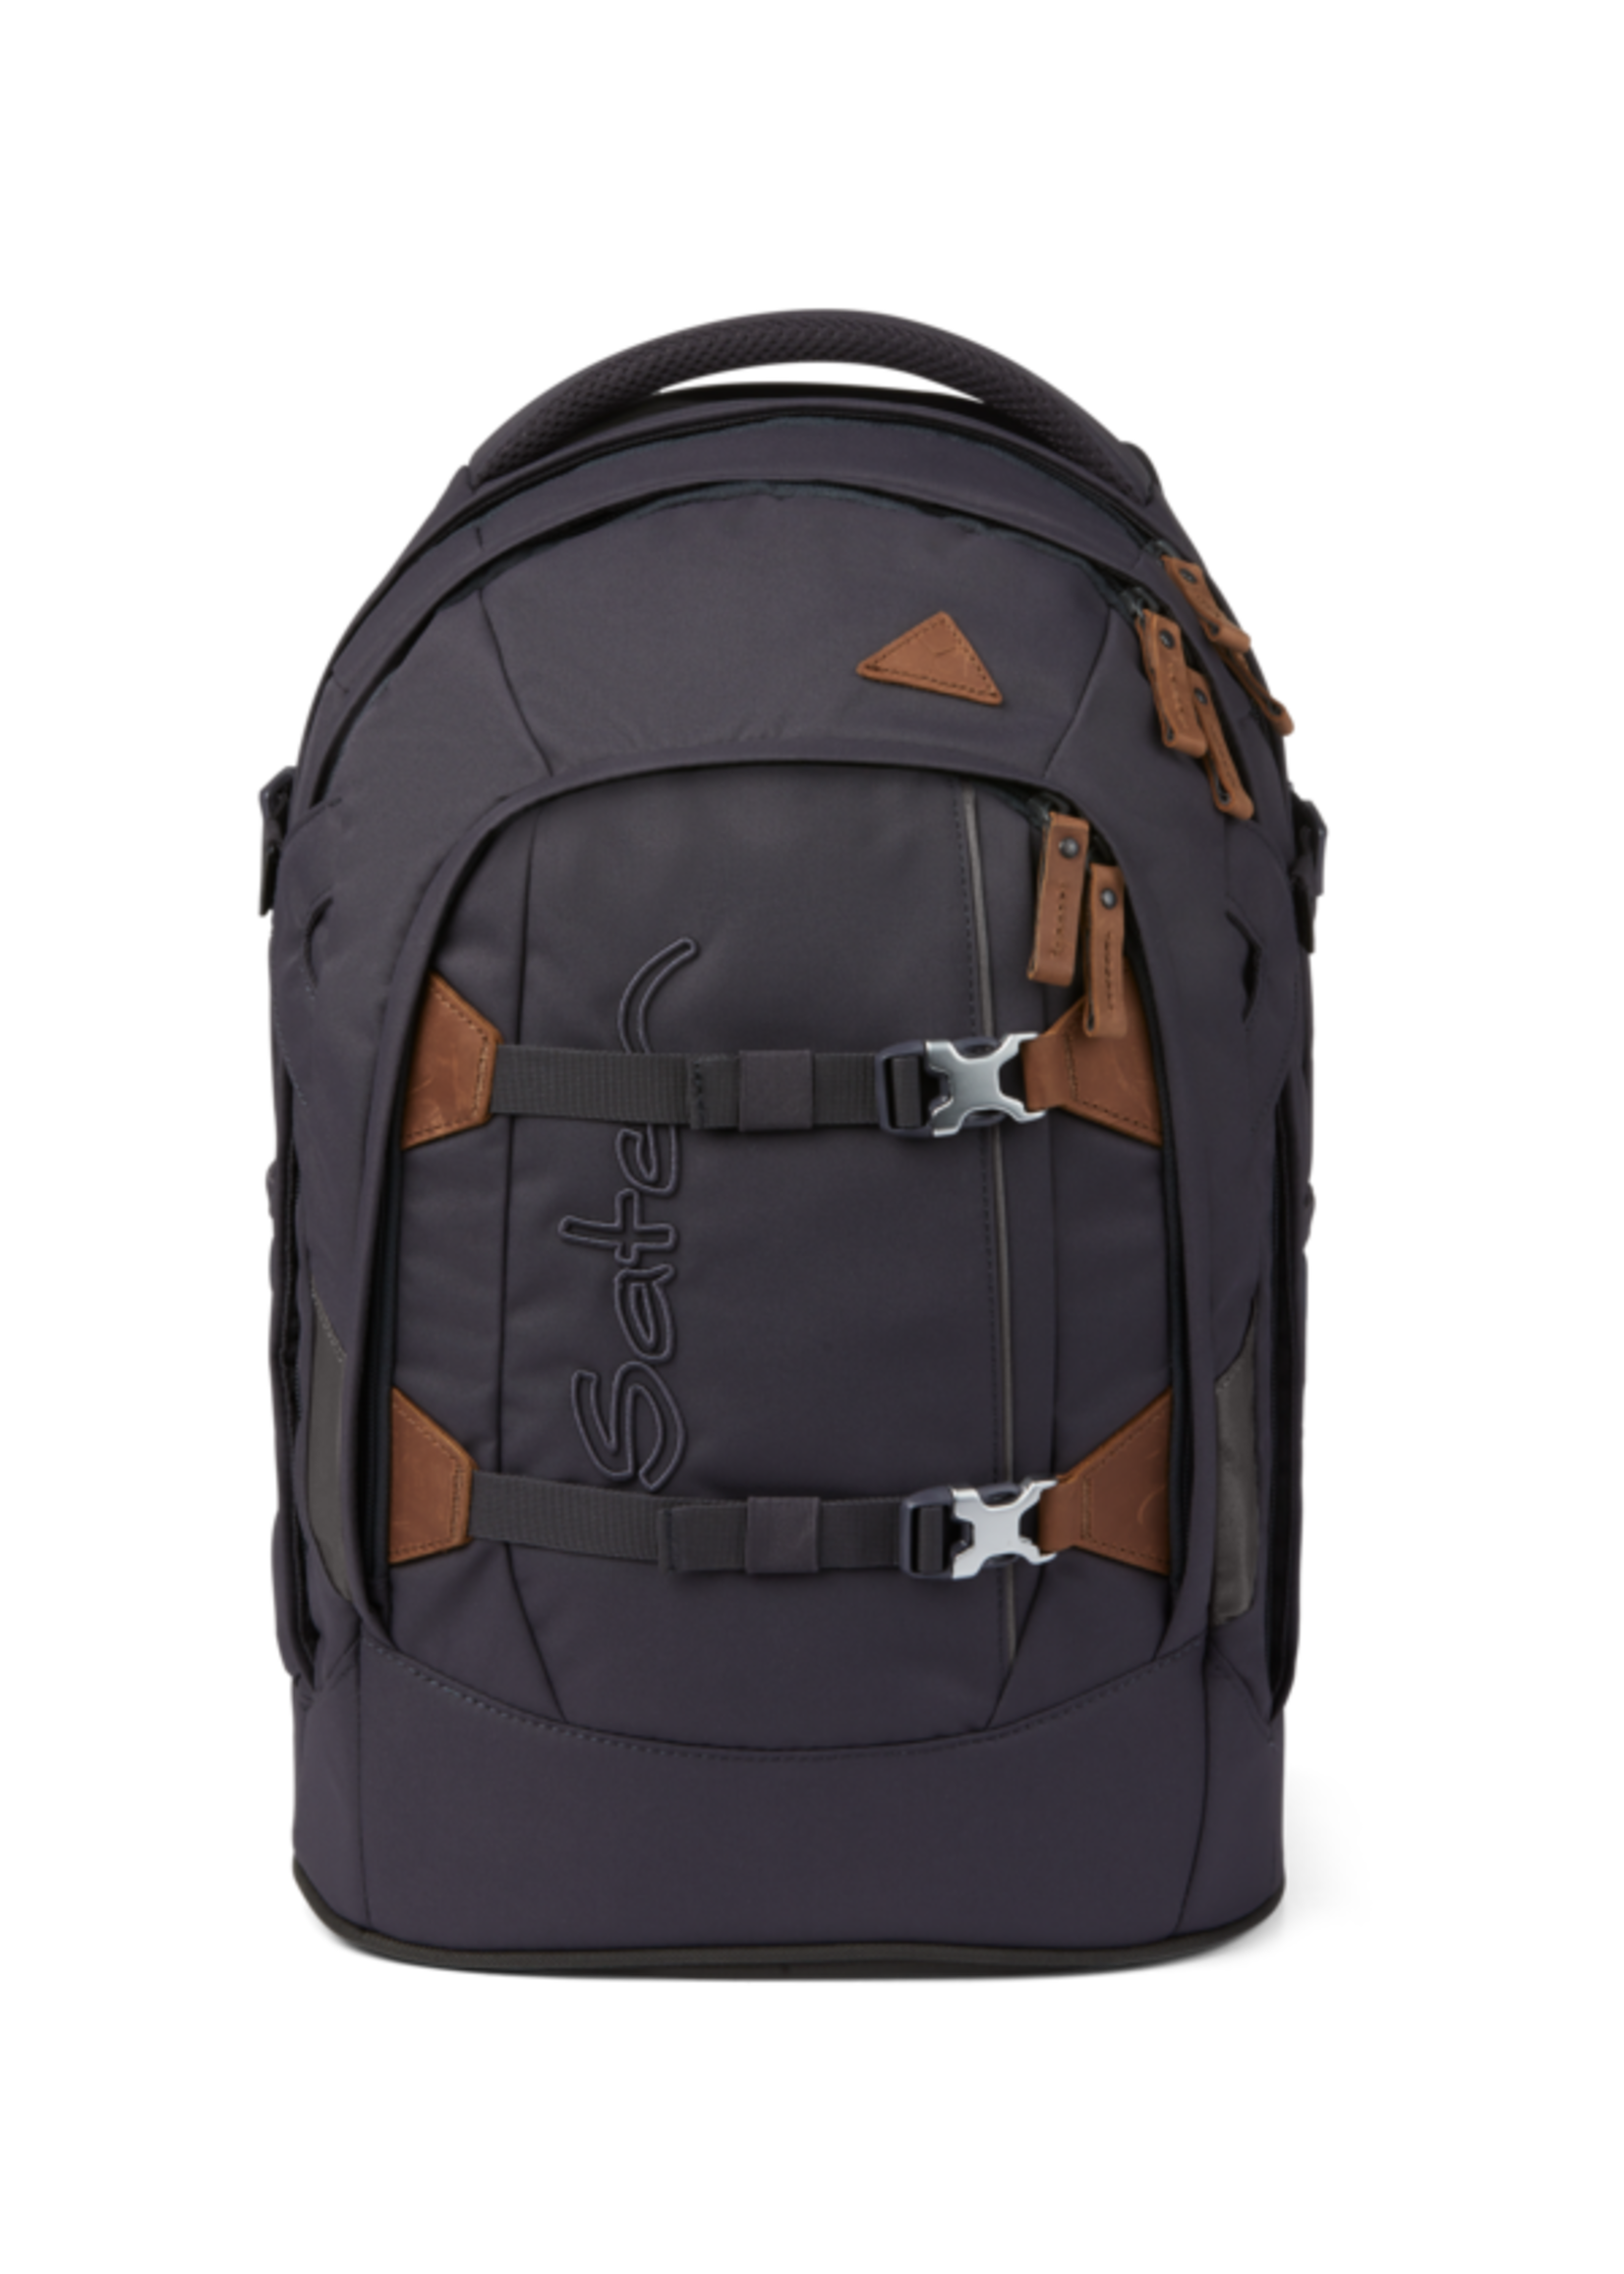 SATCH Pack Nordic Grey